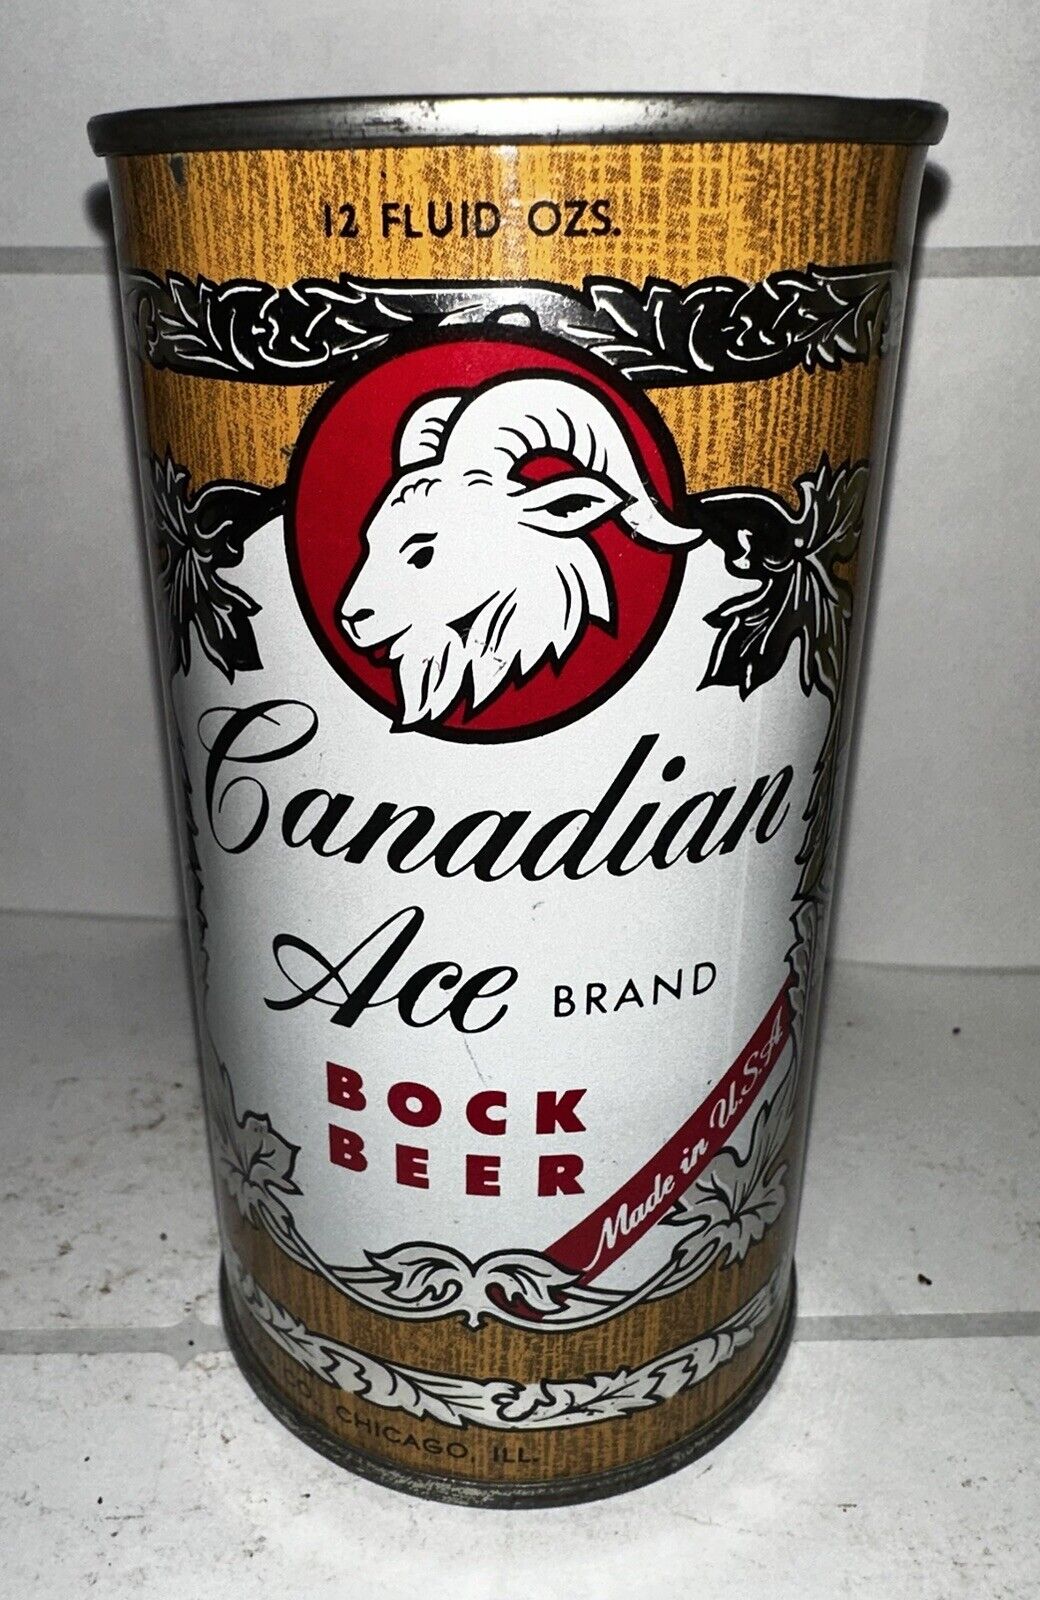 Pristine EMPTY Steel flat top bock beer can, CANADIAN ACE BOCK With Goat Graphic